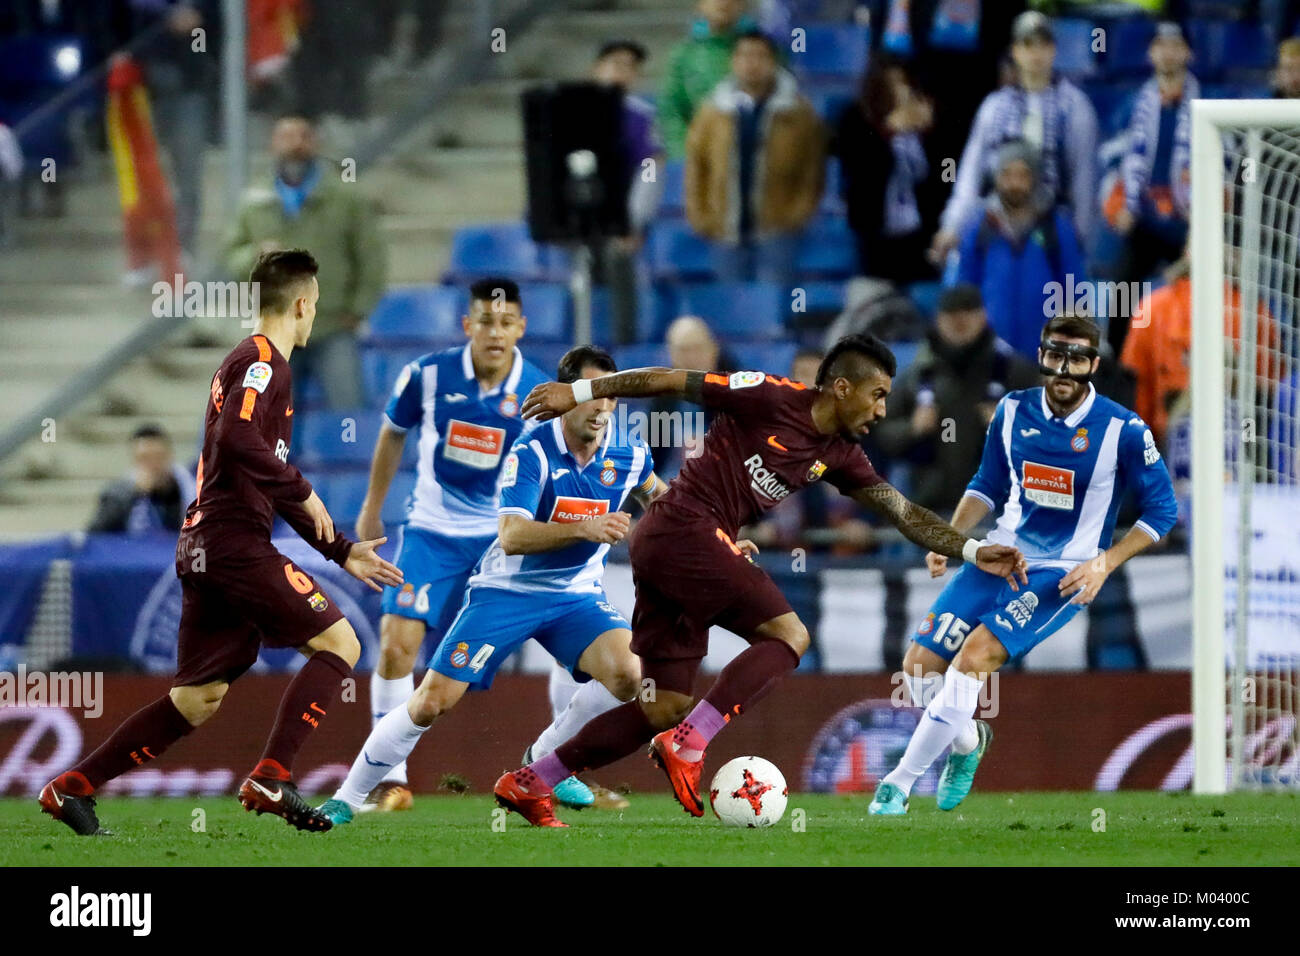 RCDE Stadium, Cornella del Llobregat, Spain. 17th January, 2018. Paulinho runs with the ball while Victor Sanchez chases him during the match at RCDE Stadium during the quarter finals of Copa de S.M. del Rey 17/18, Cornella del Llobregat, Barcelona, Spain. Credit: G. Loinaz. Credit: G. Loinaz/Alamy Live News Stock Photo